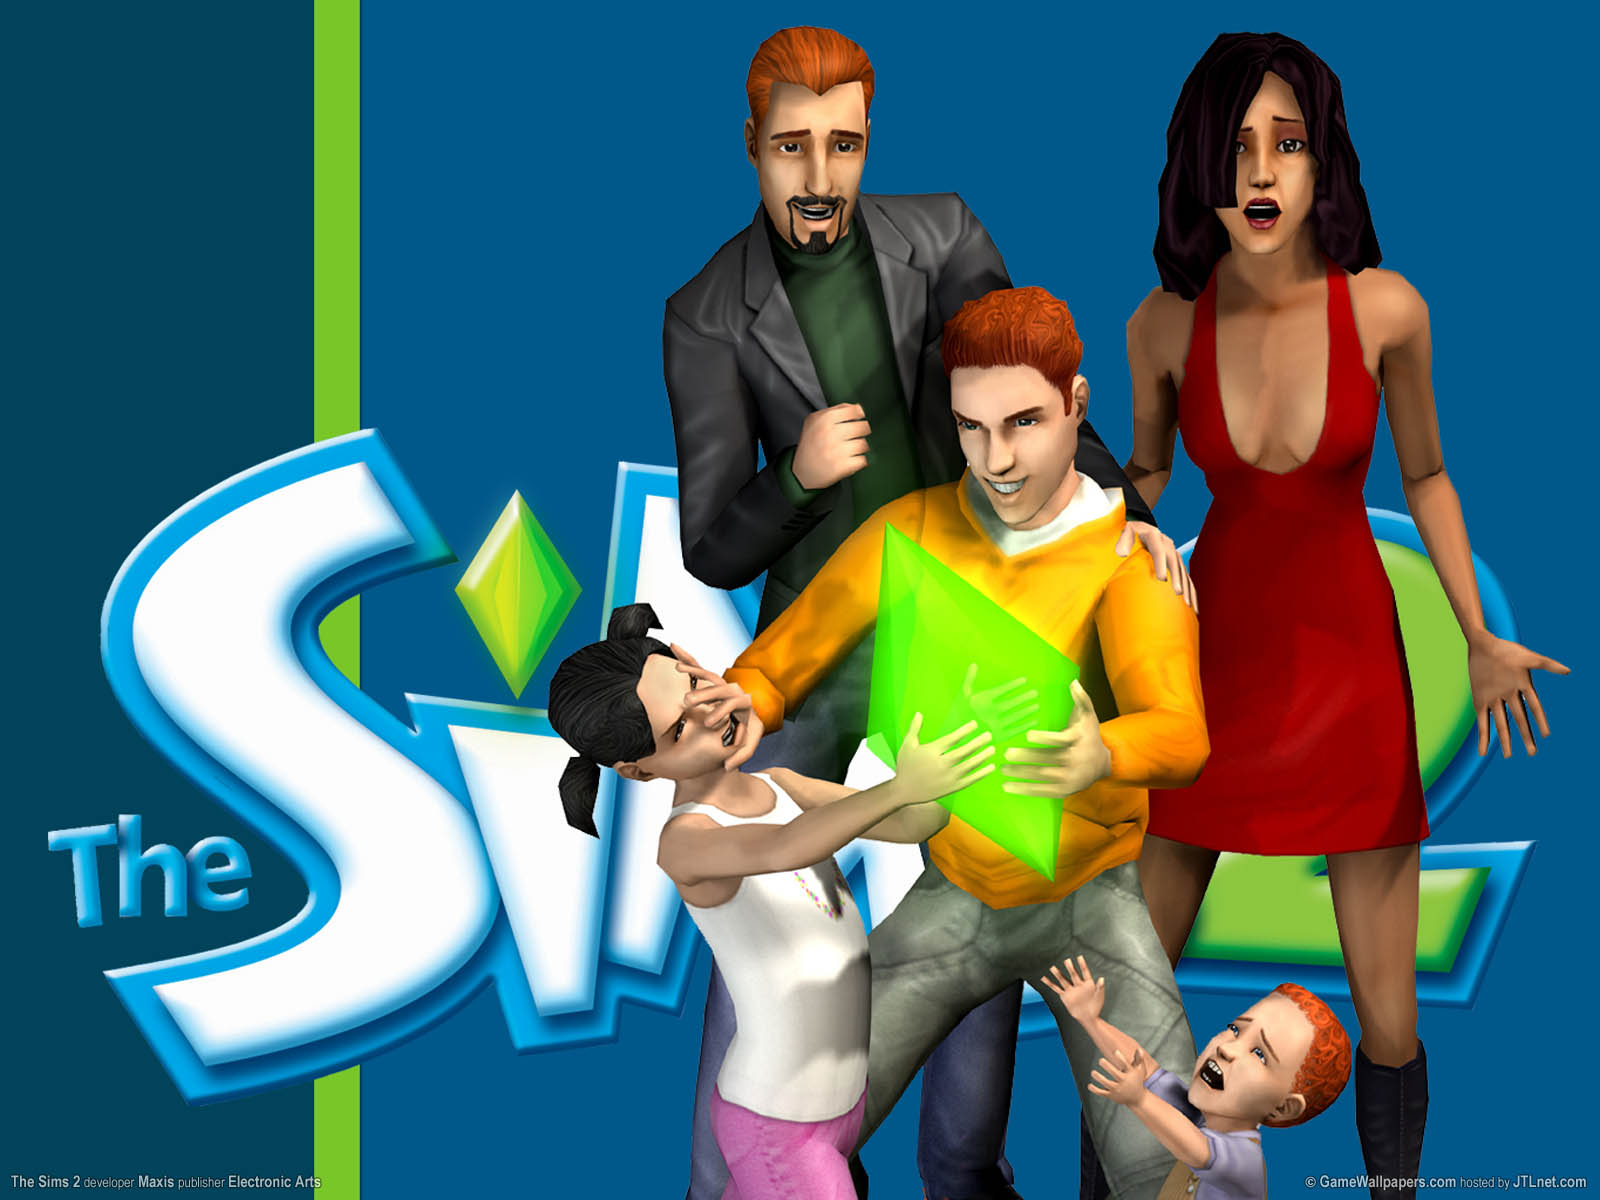 The Sims 2 wallpaper 02 1600x1200